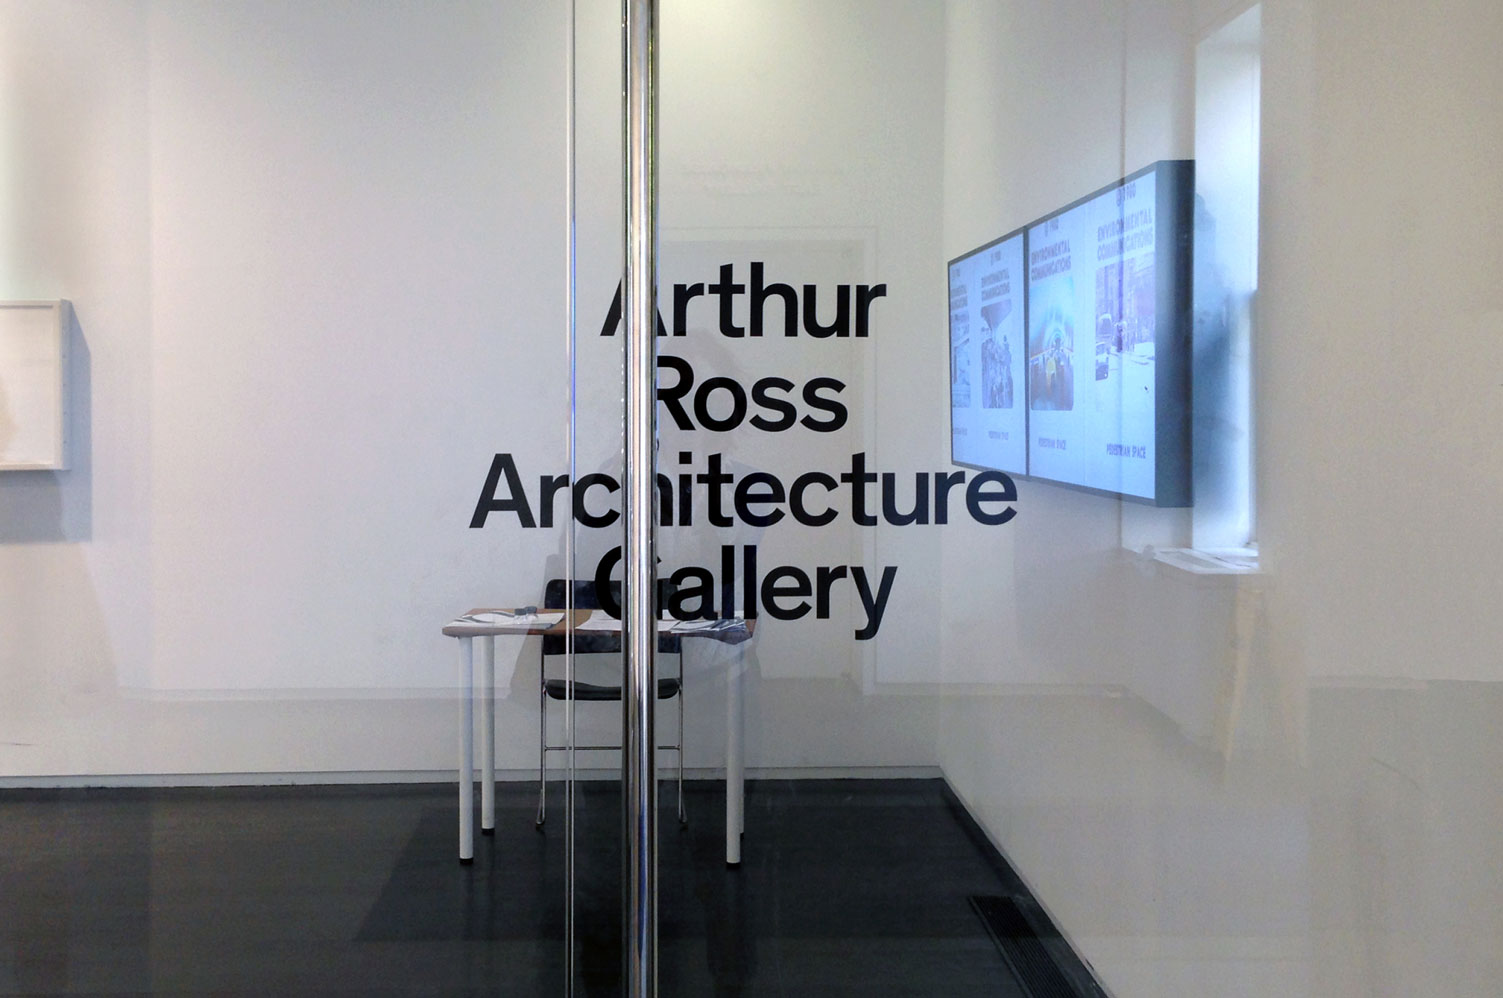 Arthur Ross Architecture Gallery identity  - MTWTF